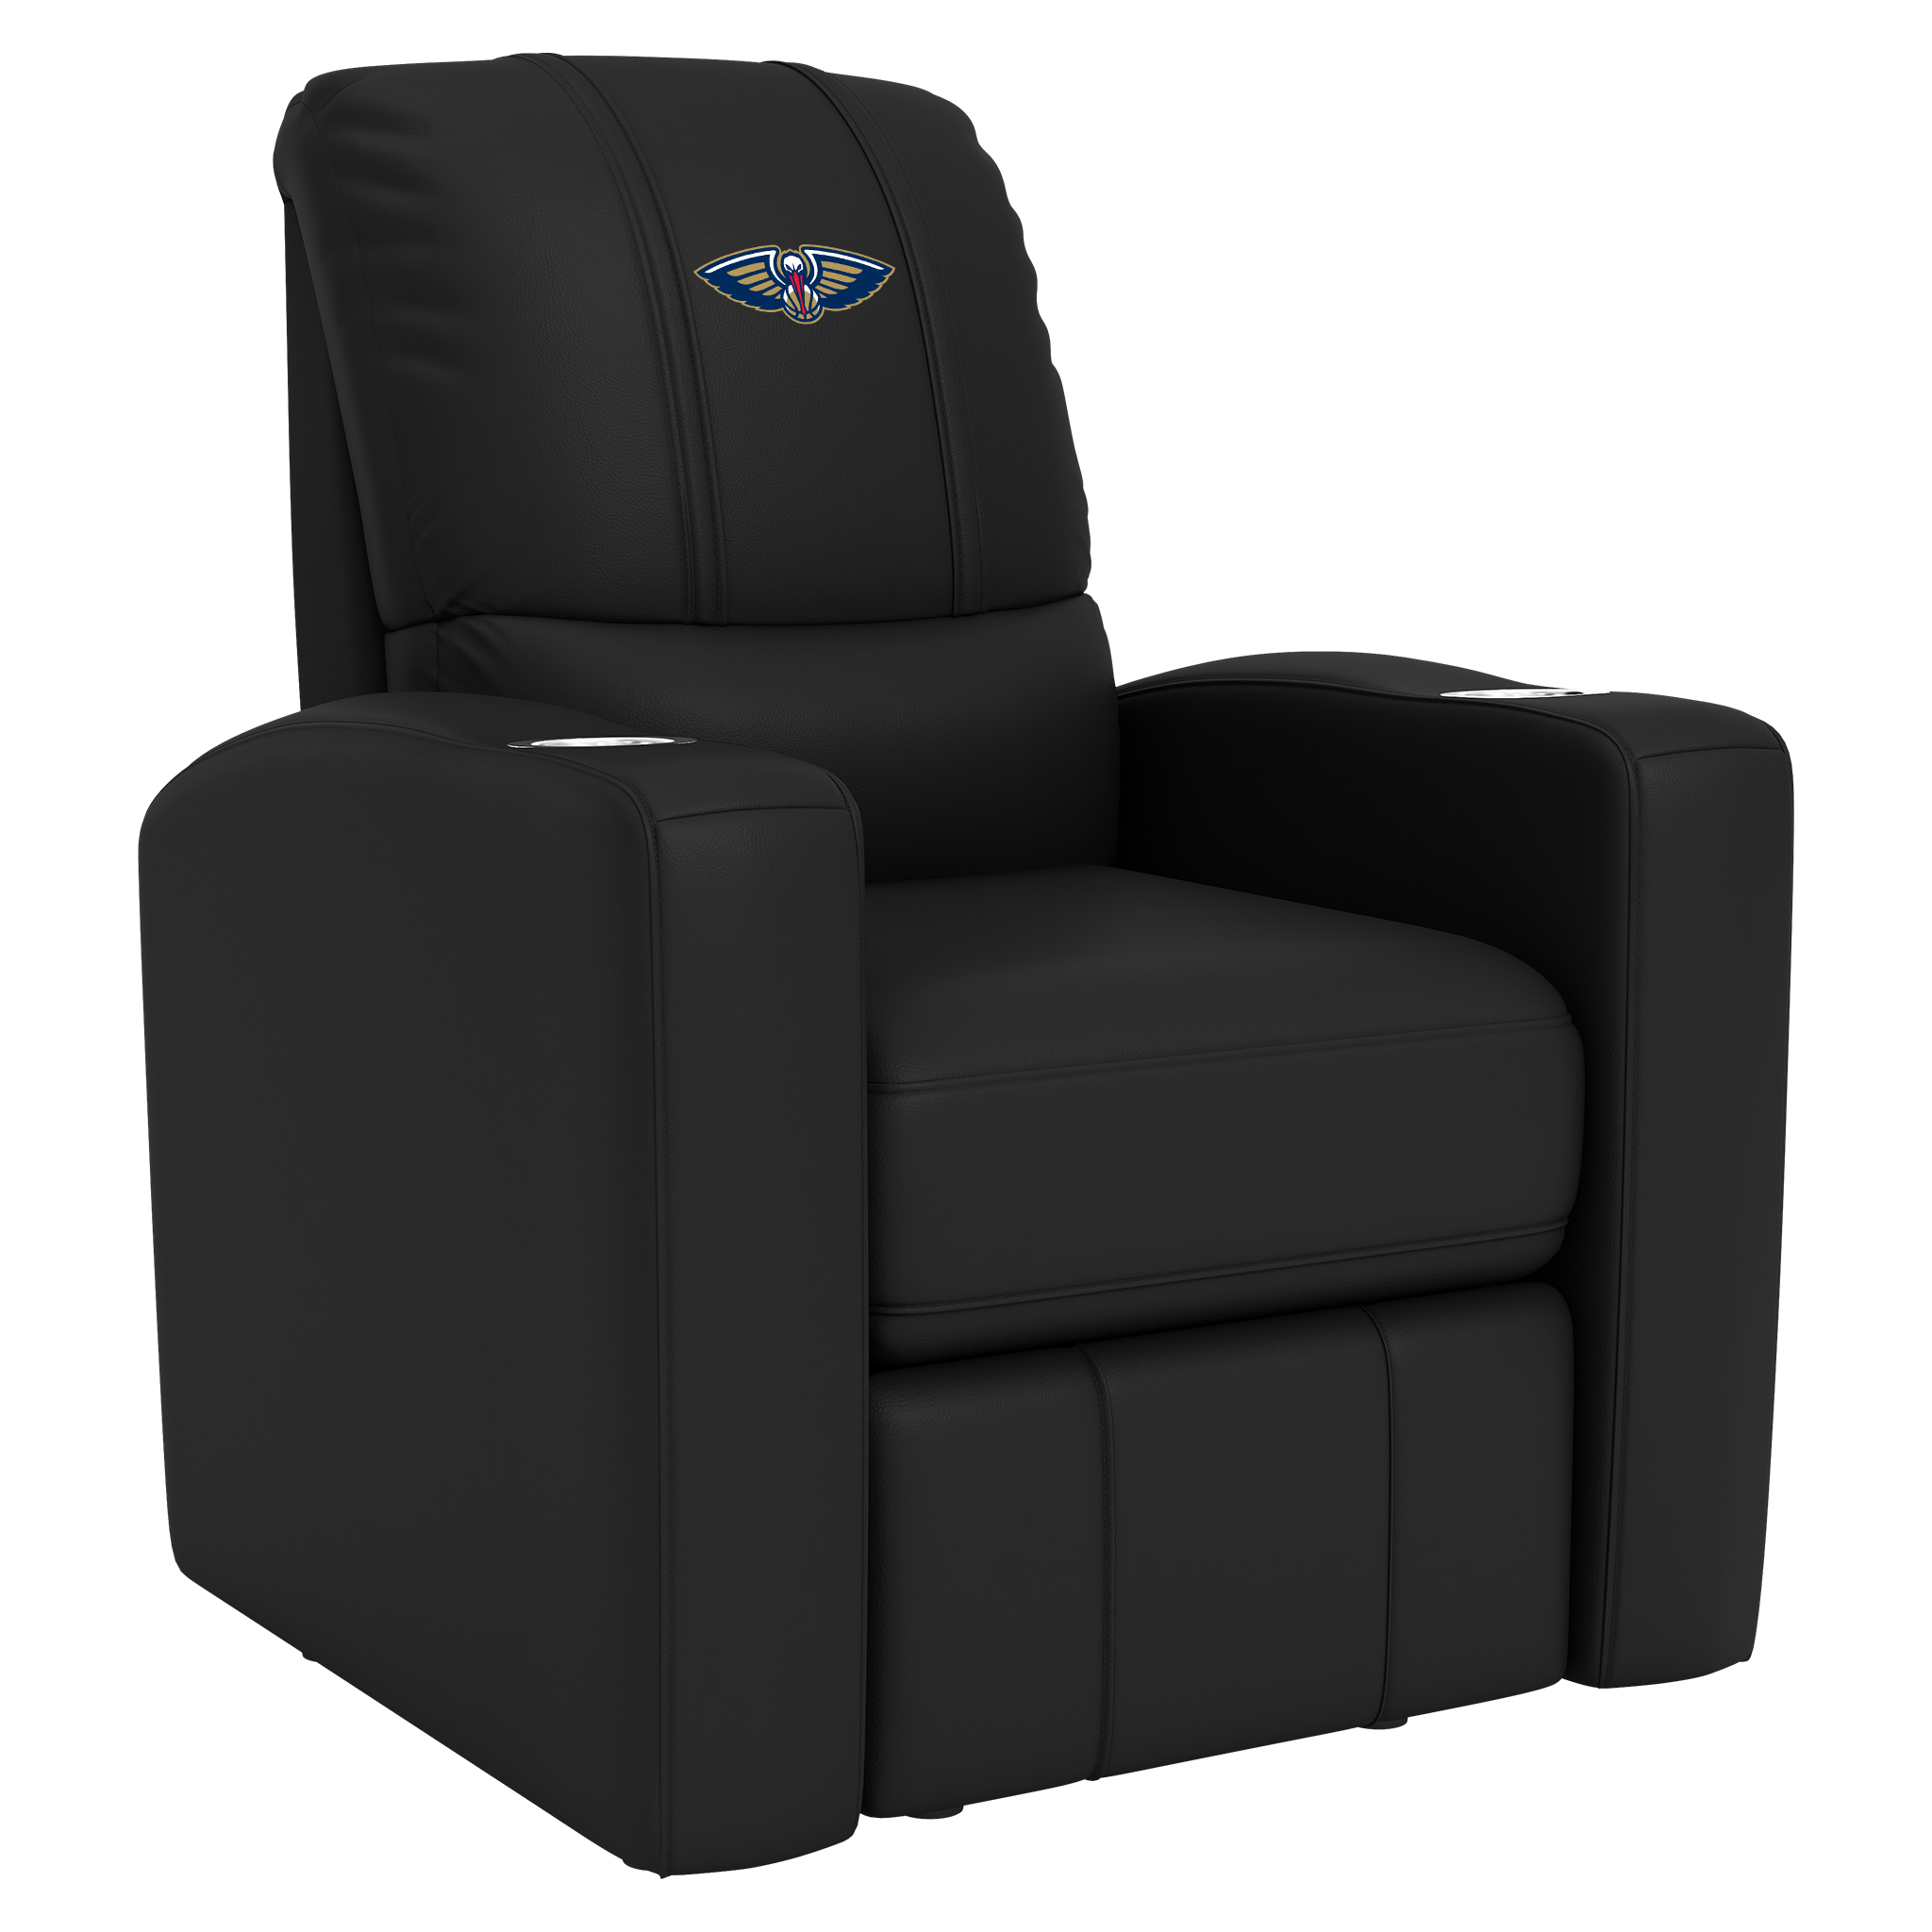 New Orleans Pelicans Stealth Recliner with New Orleans Pelicans Primary Logo